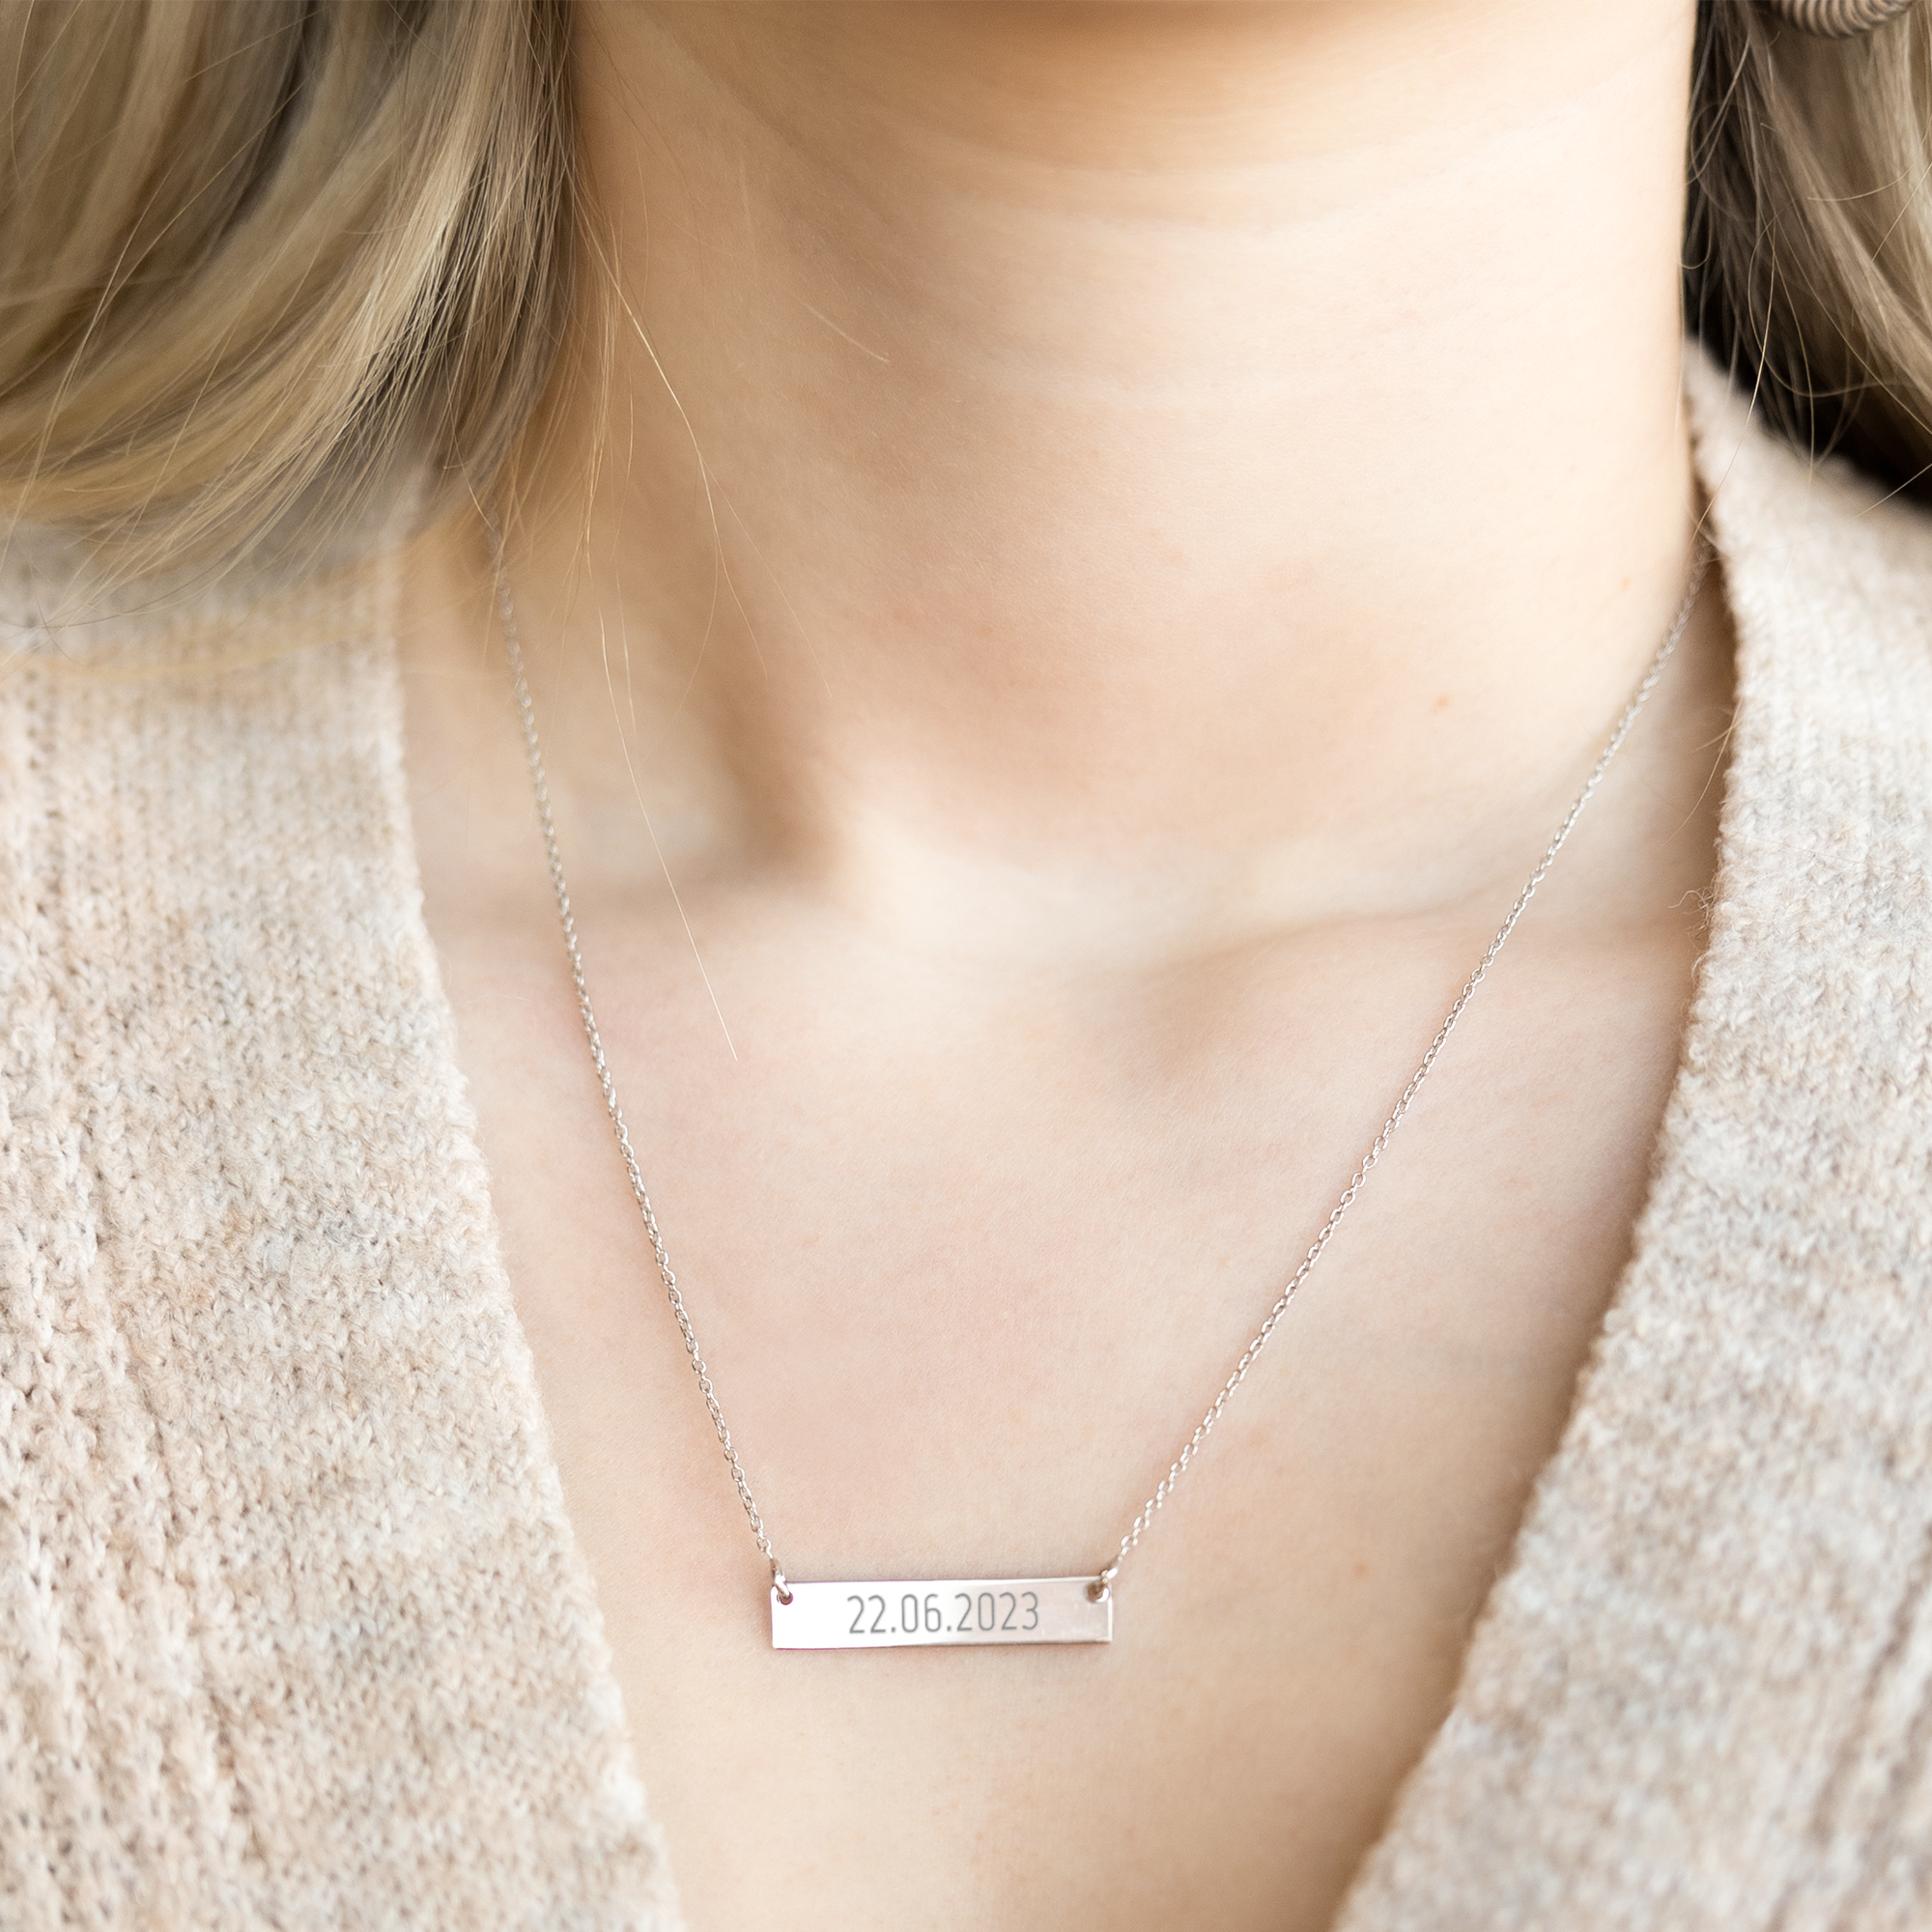 Silver necklace with name - Horizontal bar